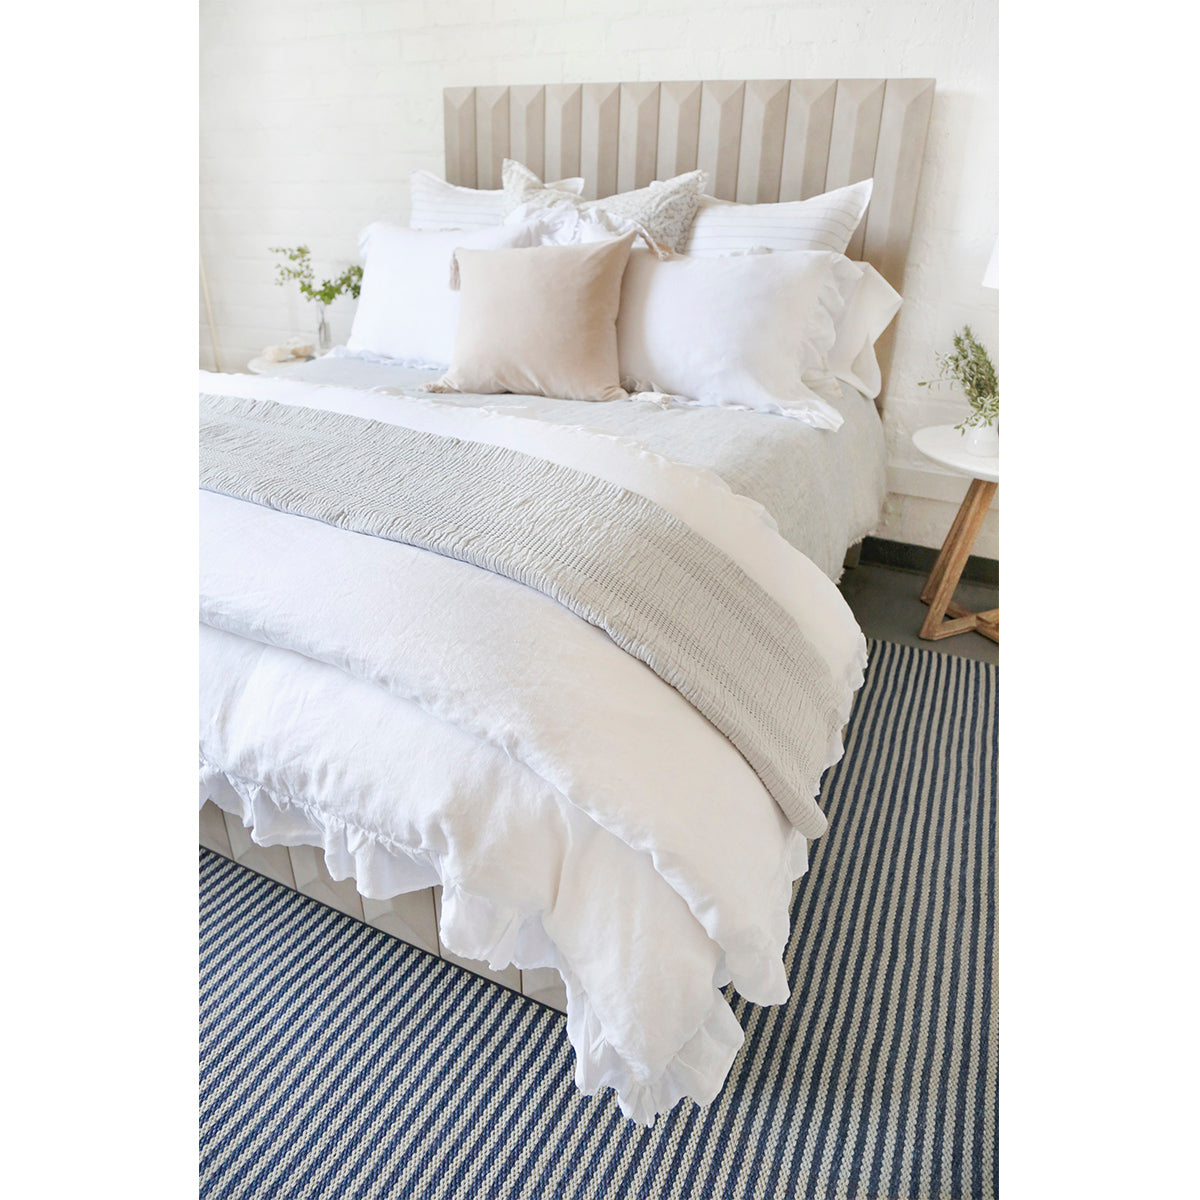 nantucket matelasse collection - coverlet - 3 colors - pom pom at home